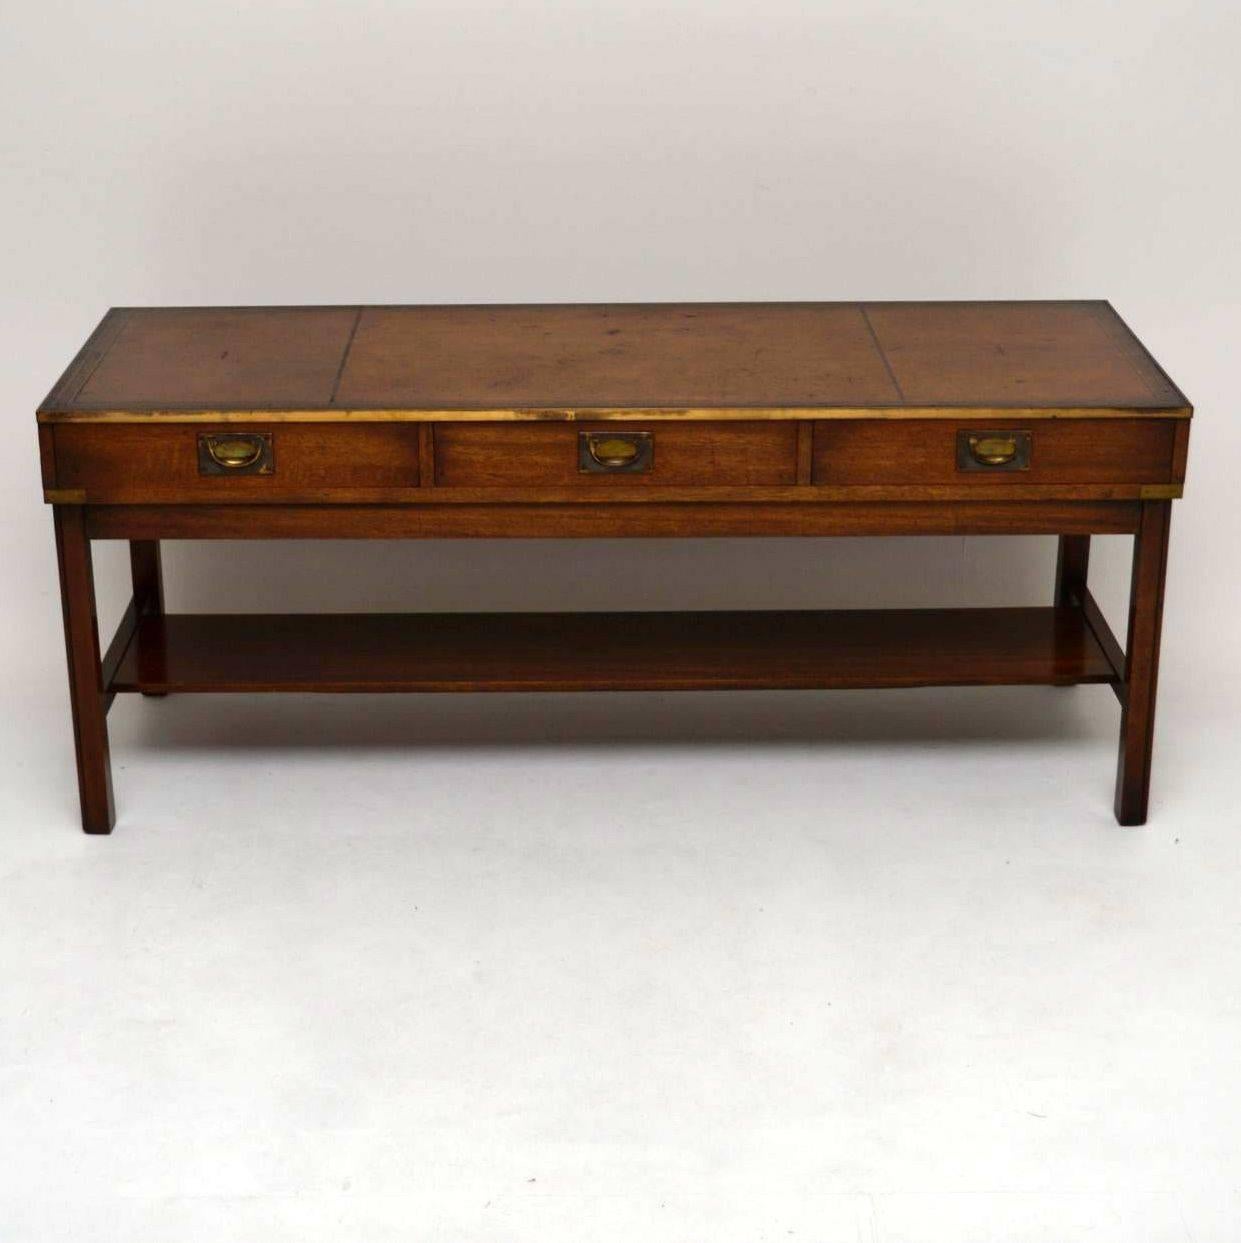 It's hard to find antique coffee tables and even harder to find large ones. This coffee table is great looking and is Campaign style, with an original leather top, brass corner pieces, three drawers with brass military handles and a brass trim all